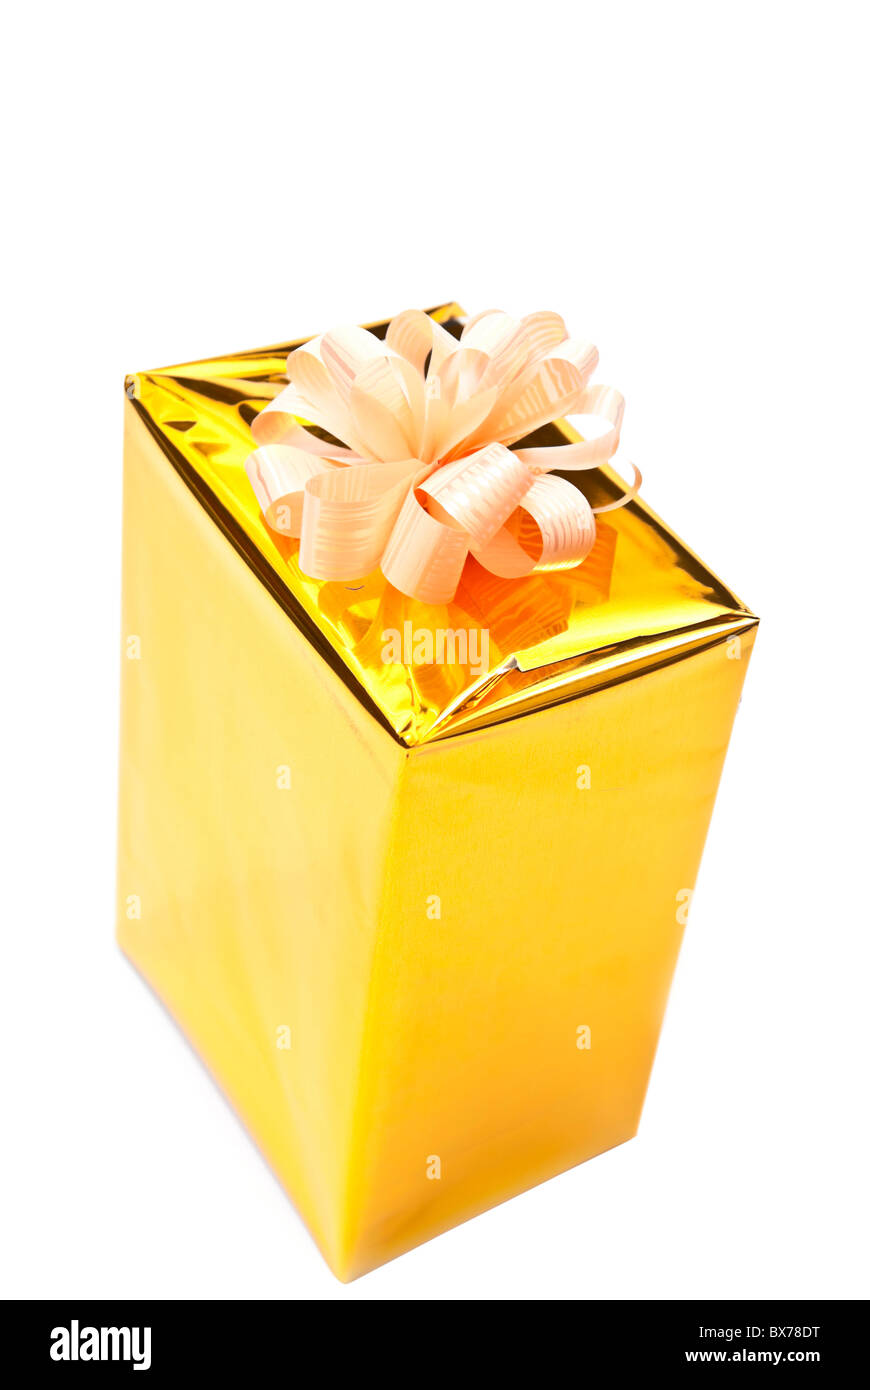 golden gifts Stock Photo